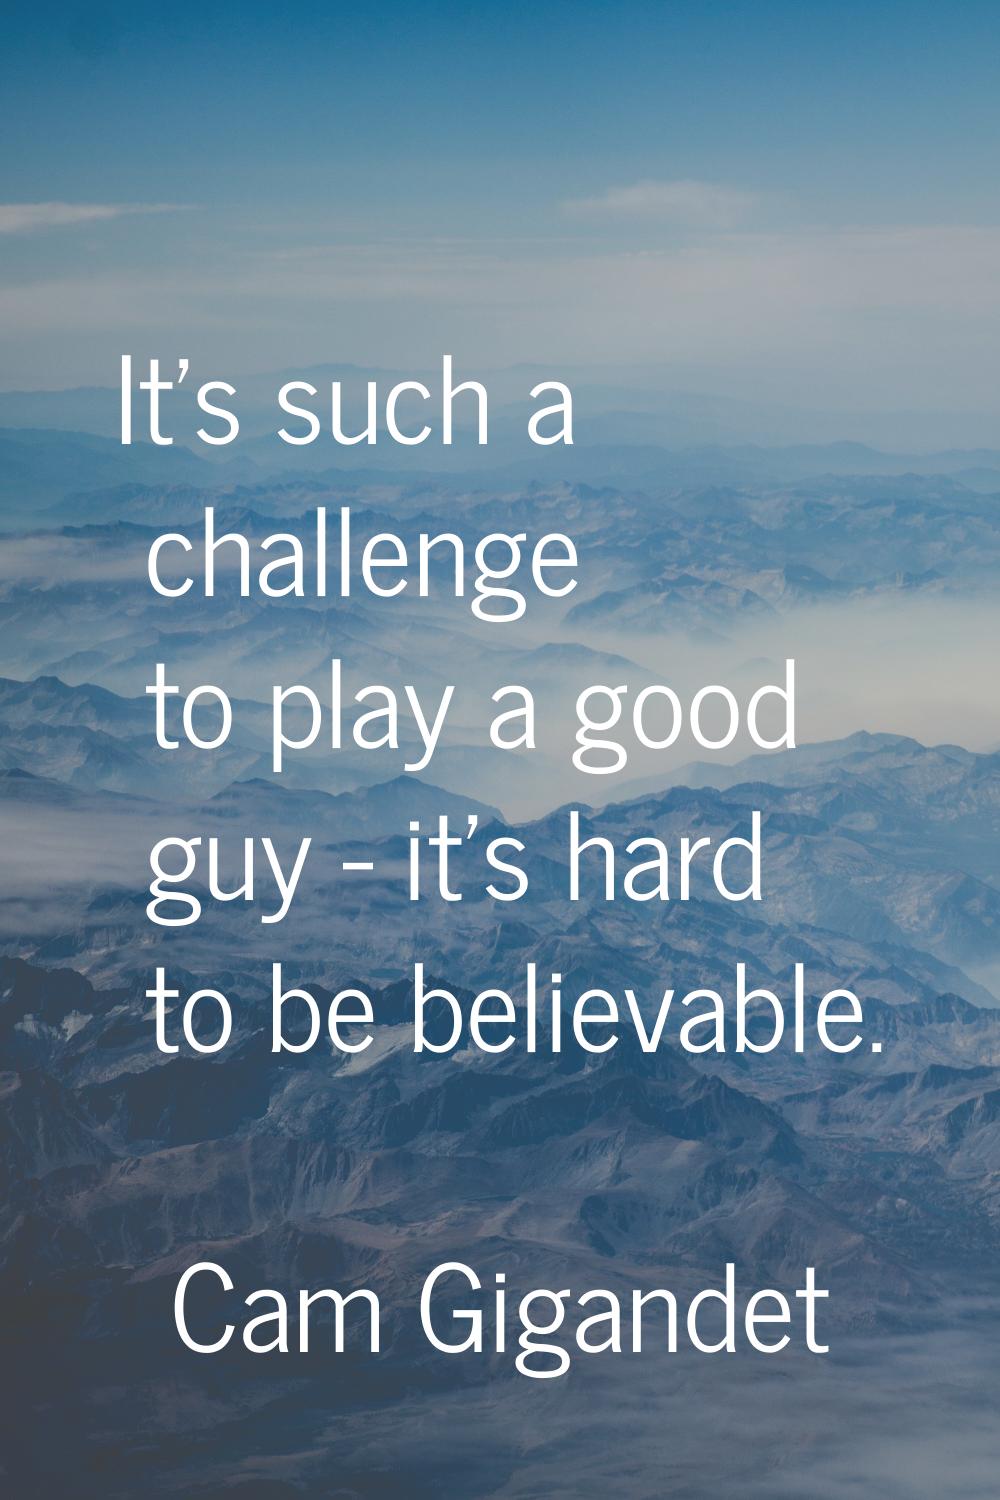 It's such a challenge to play a good guy - it's hard to be believable.